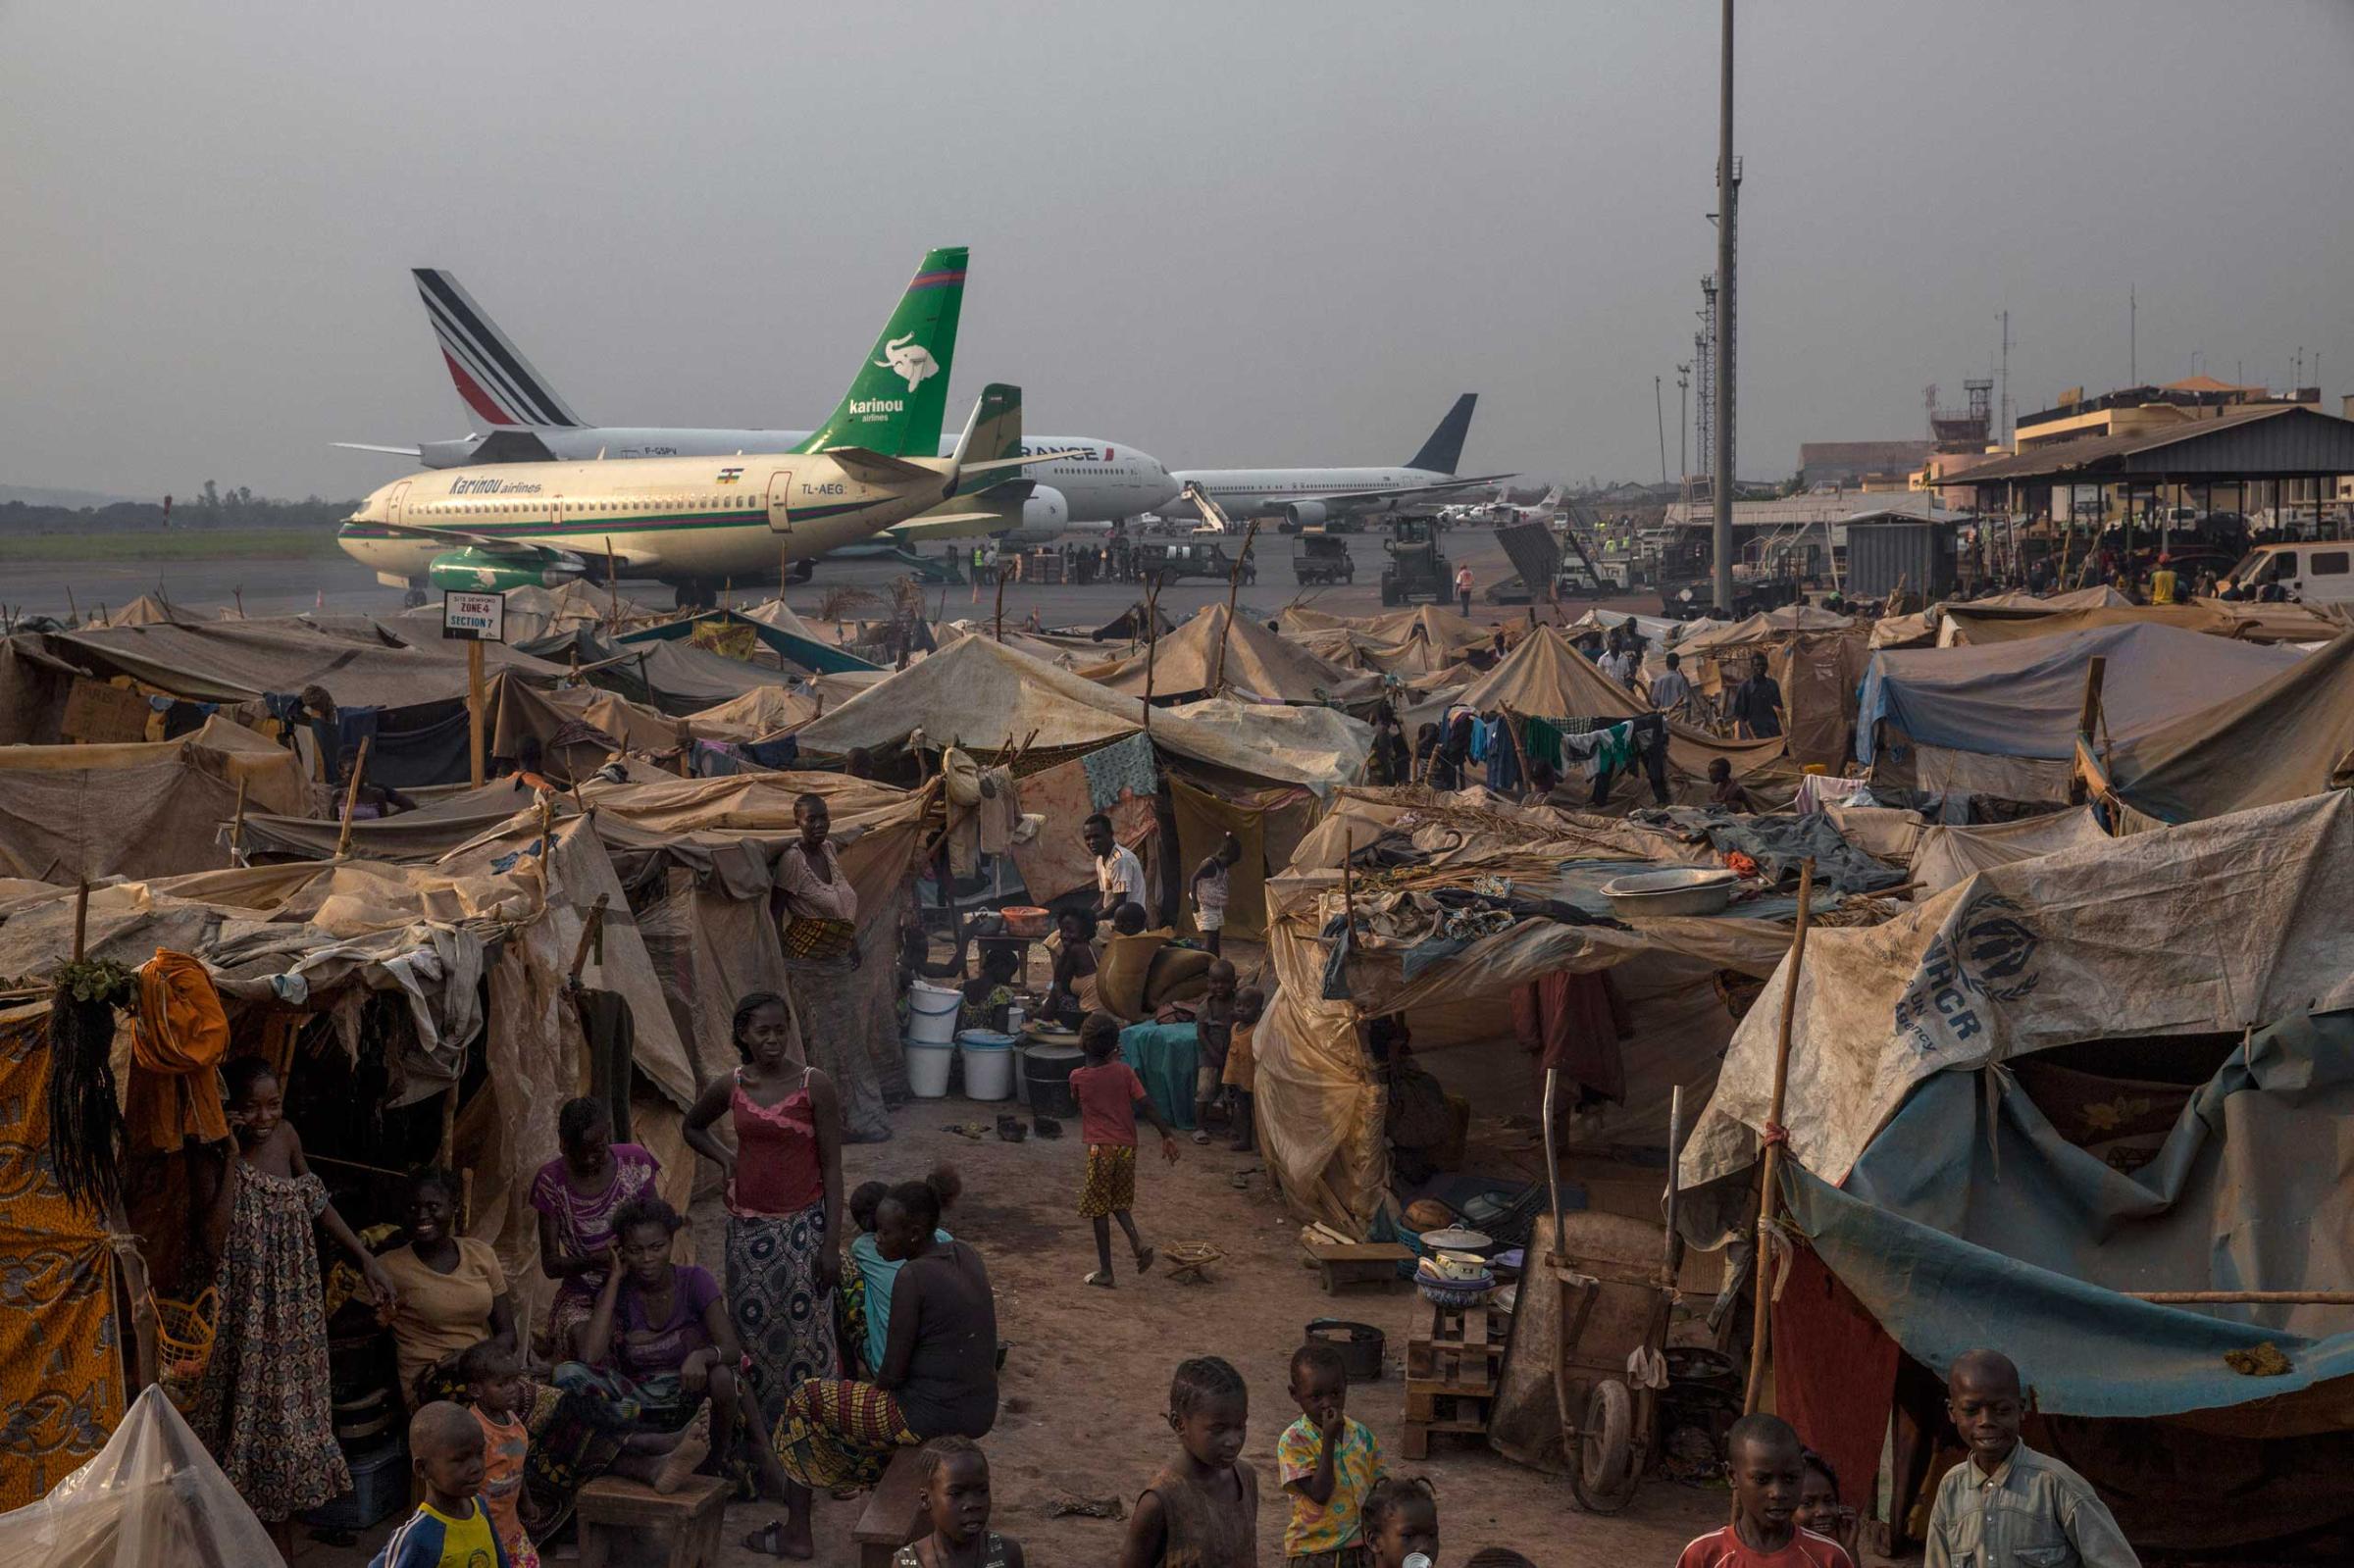 Jan. 28, 2014: The main displacement camp adjacent to Bangui's M'Poko International Airport, where thousands of people fled after the violence erupted in early December, now houses more than 100,000 people. The airport is secured by the French army.